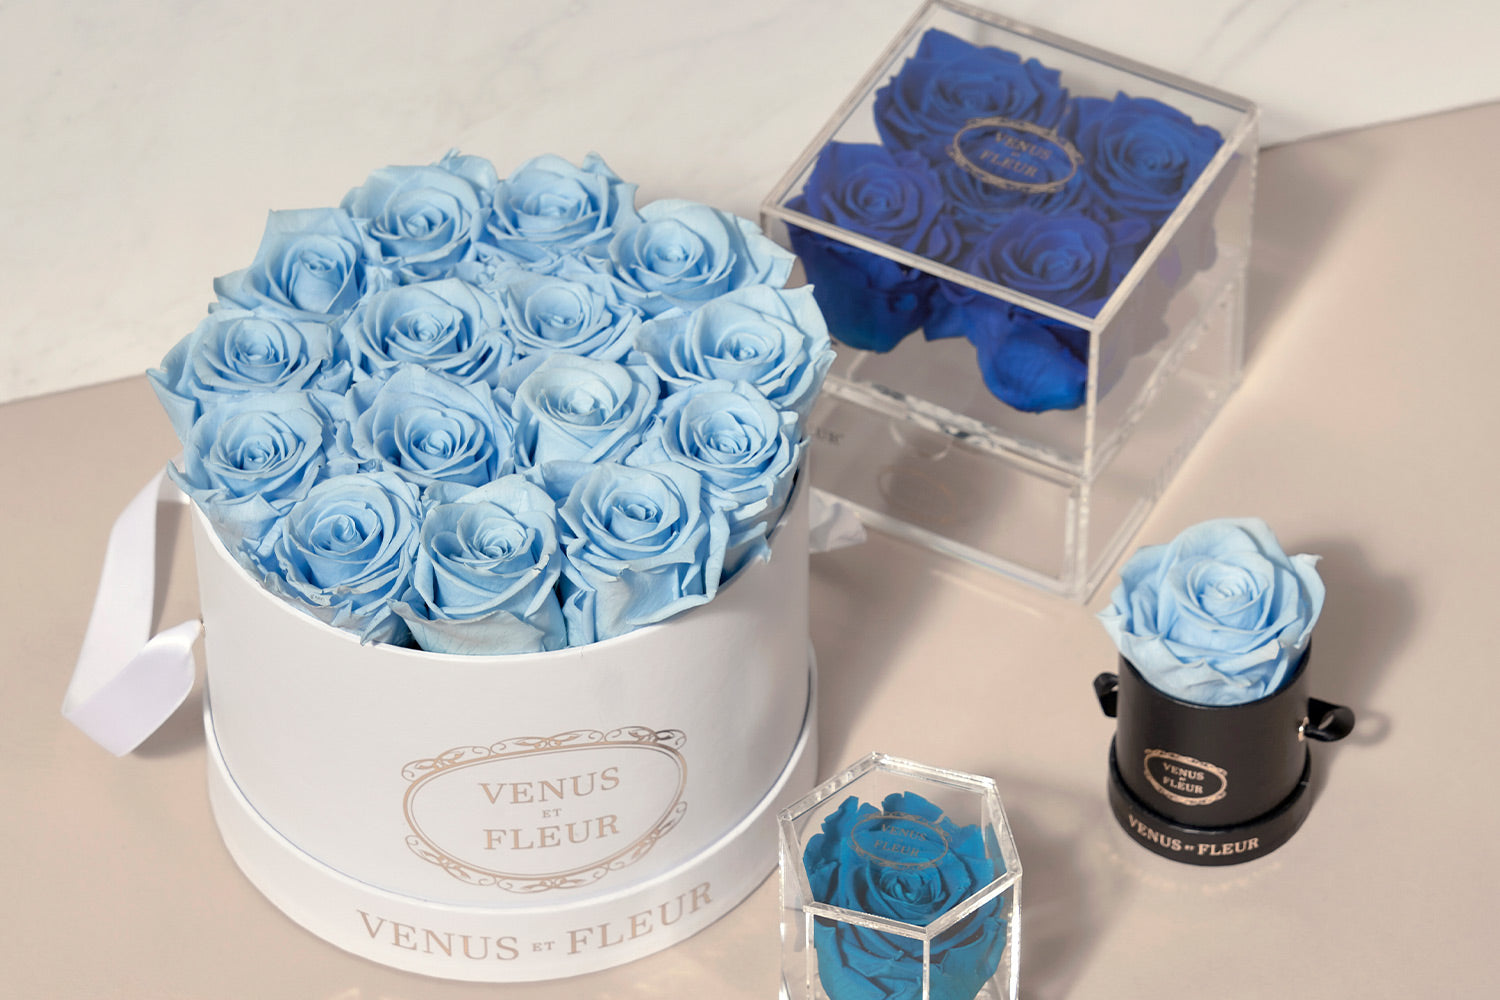 How To Host a Gender Reveal Party With Preserved Roses